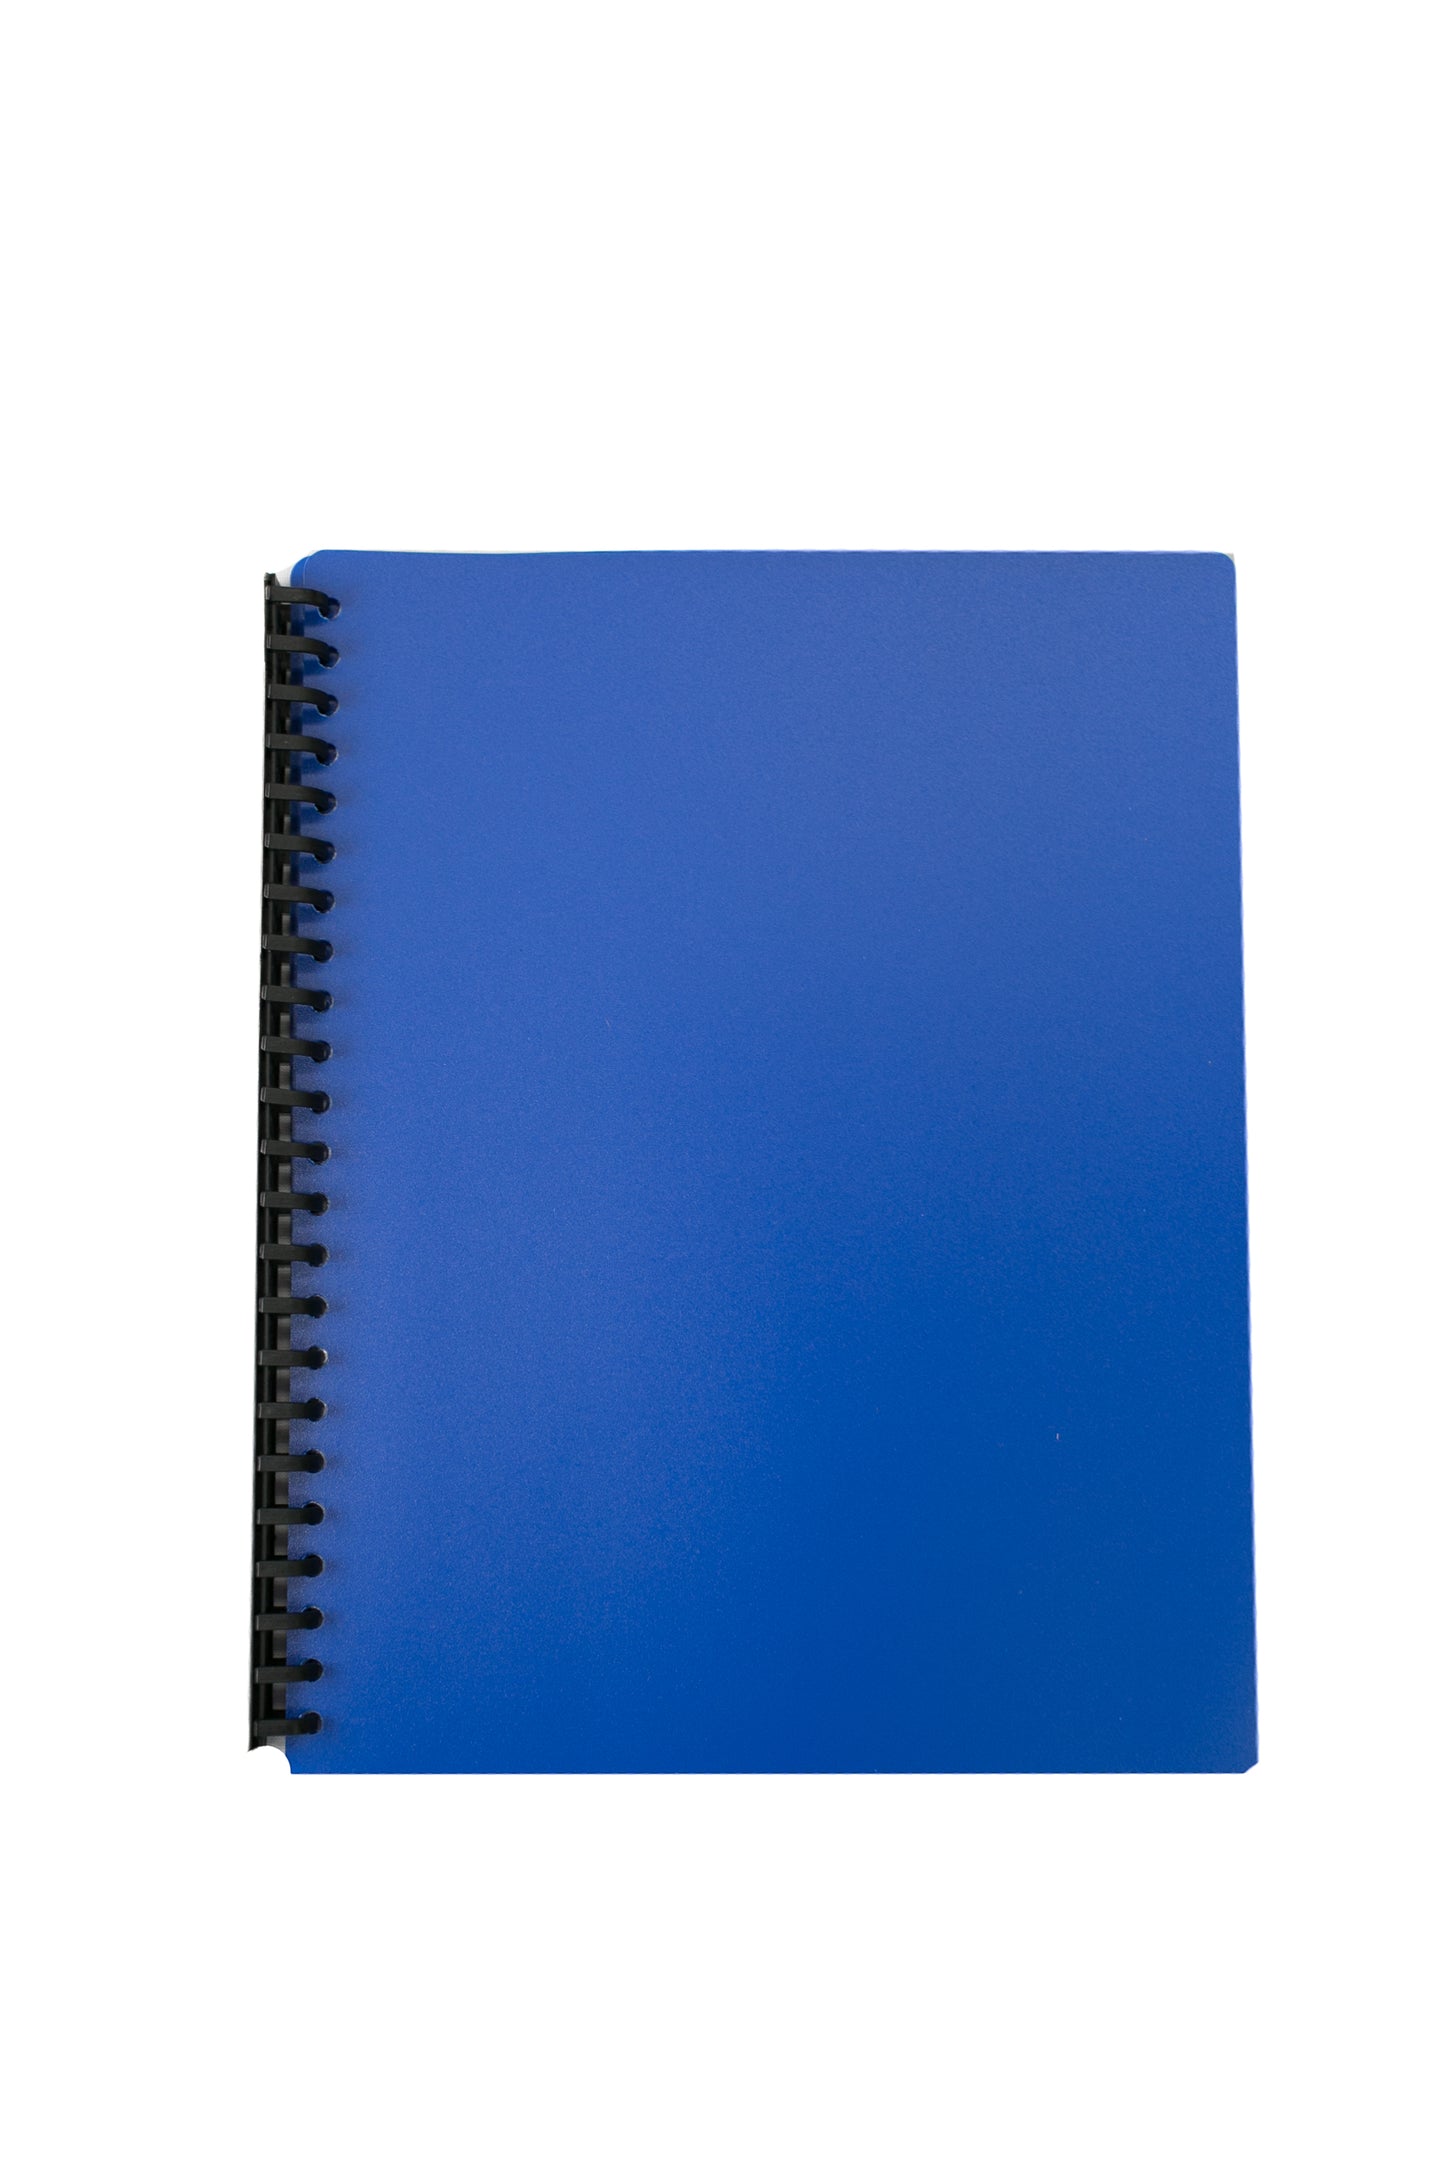 Clearbook 20 Pockets A4, Refillable, Blue